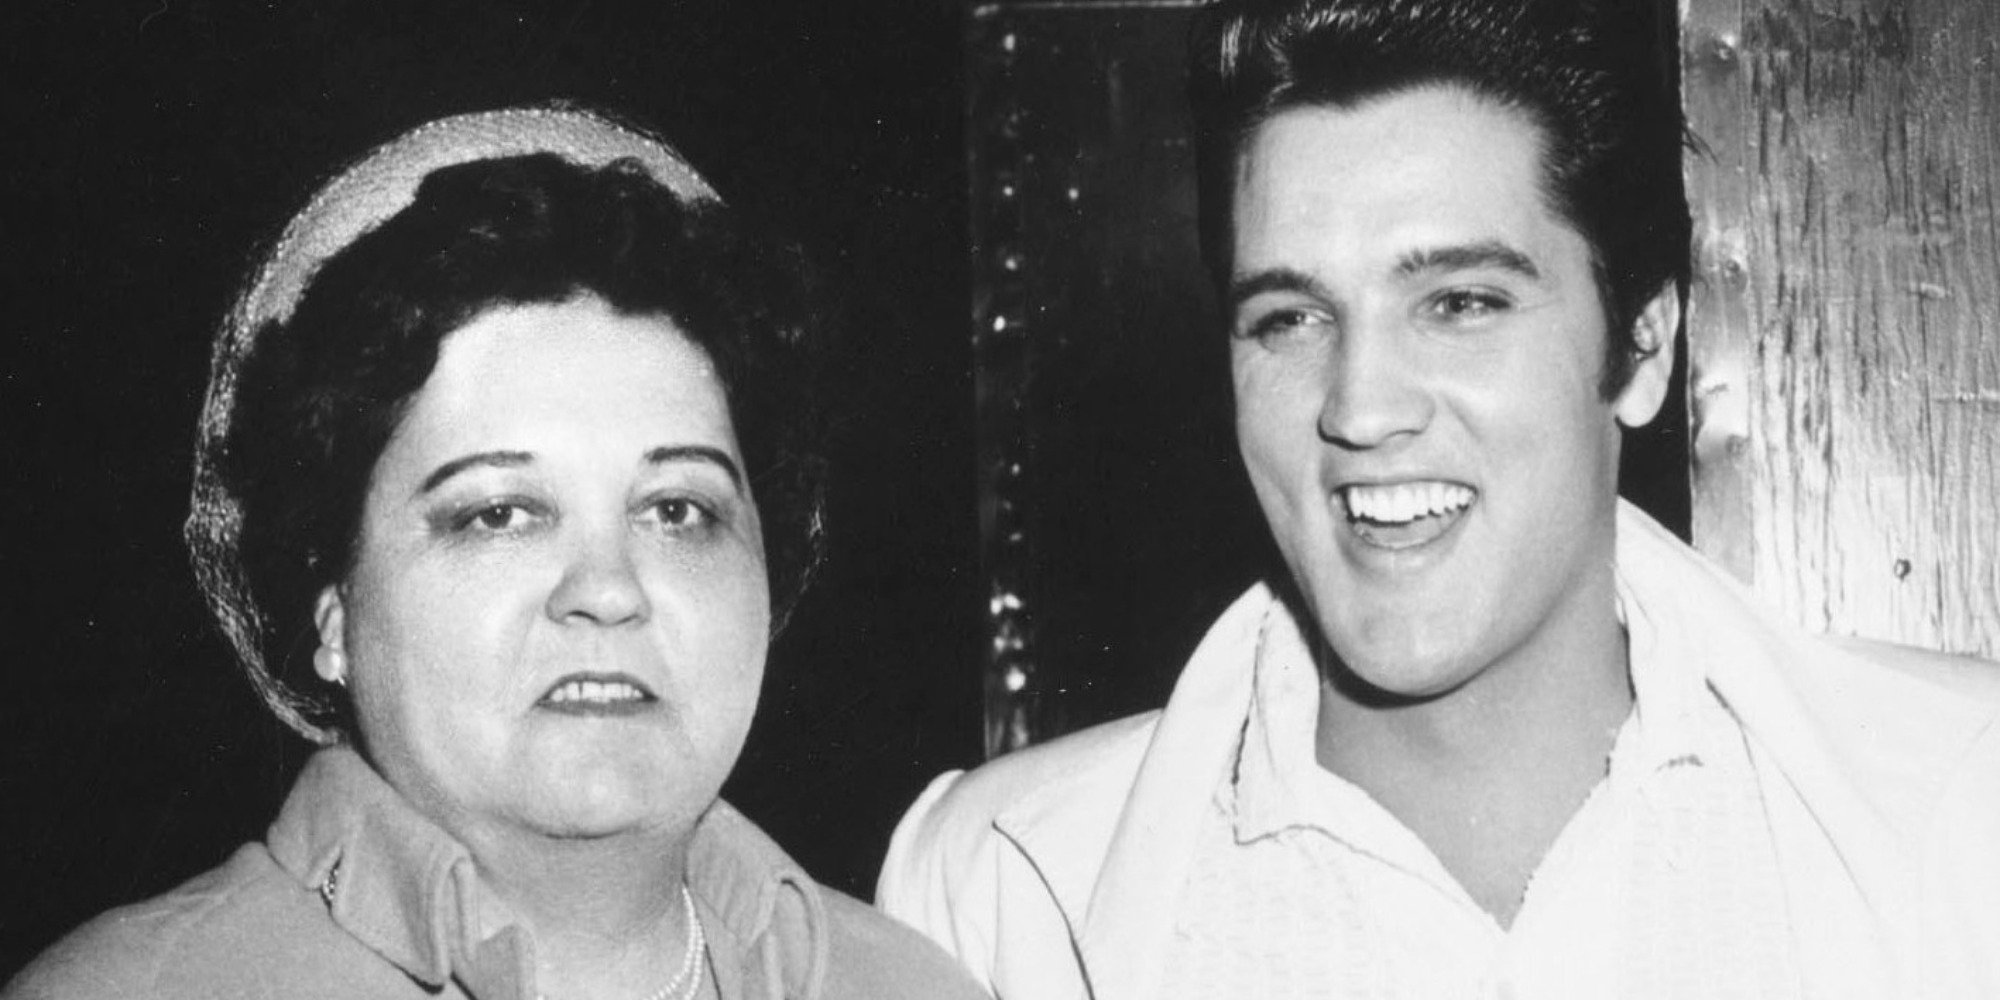 Gladys and Elvis Presley in a posed photograph.